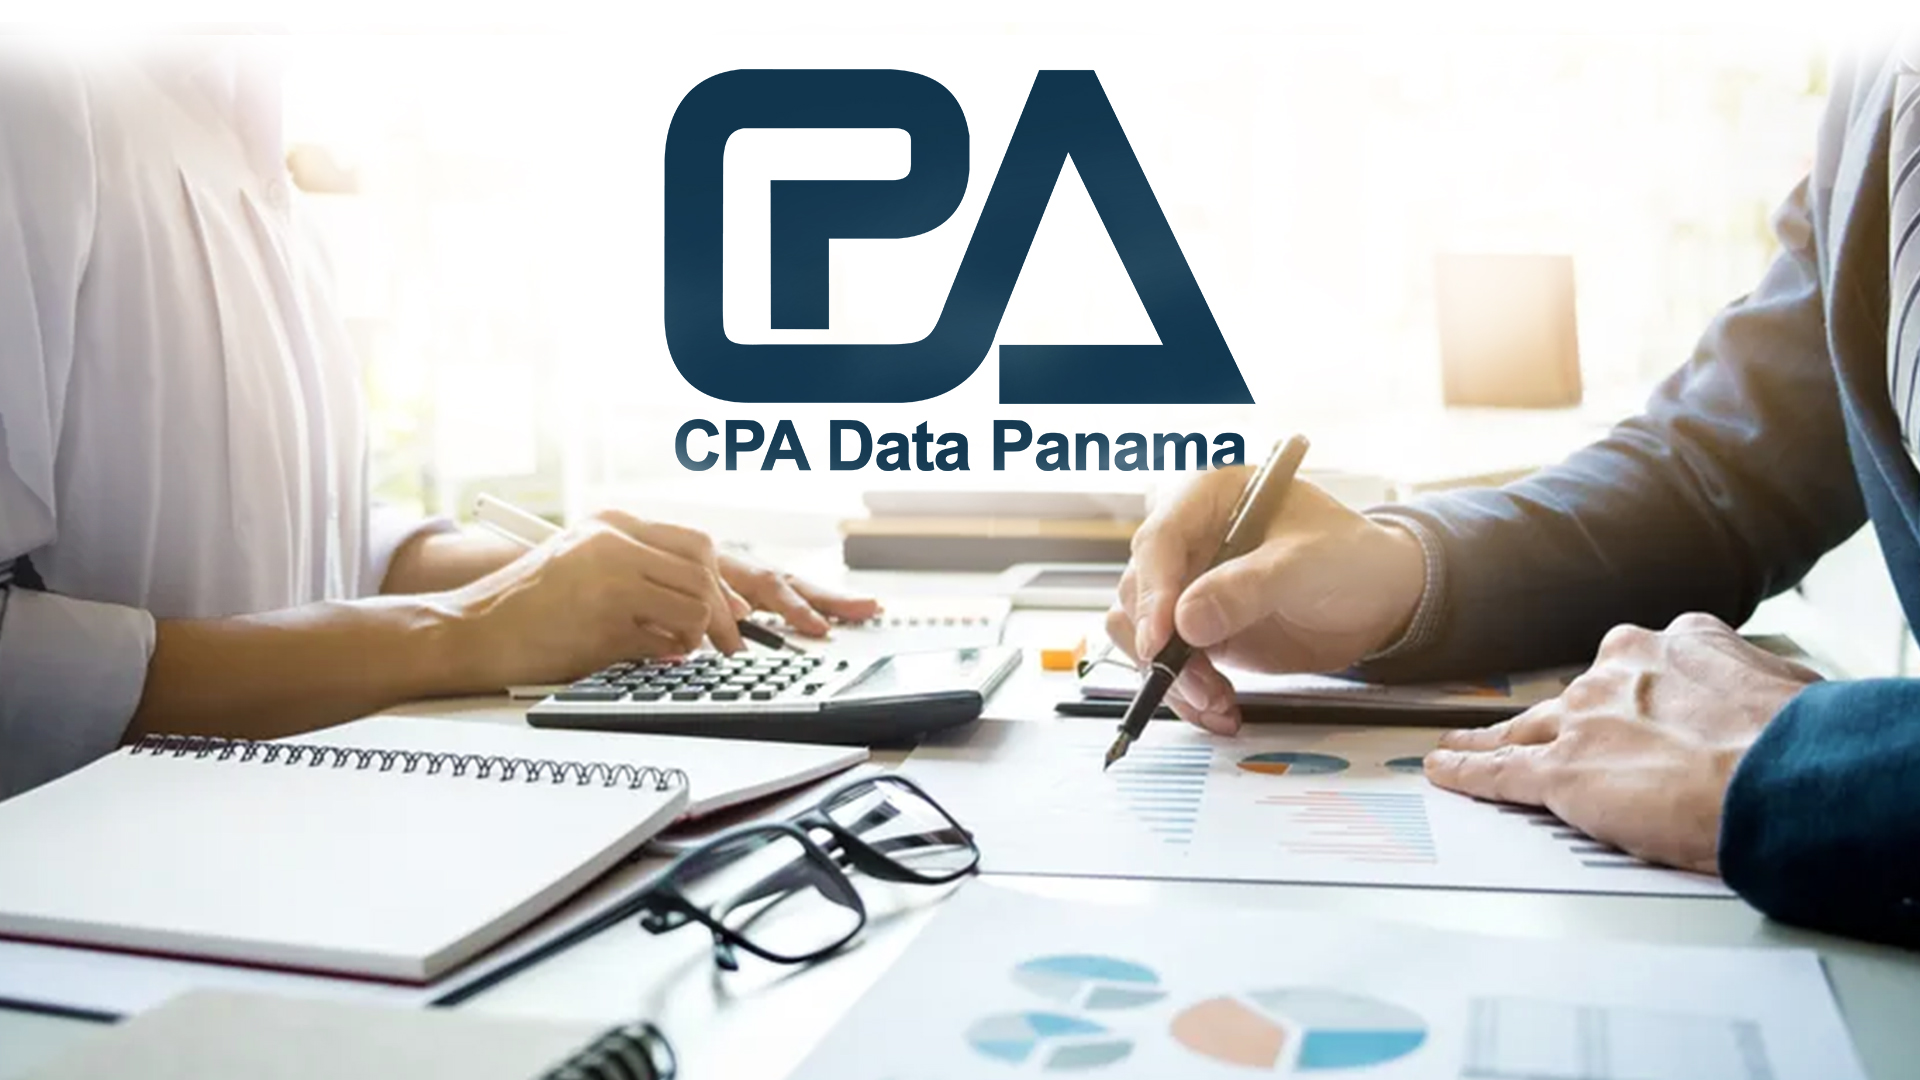 Panama’s offshore companies are looking for accounting software